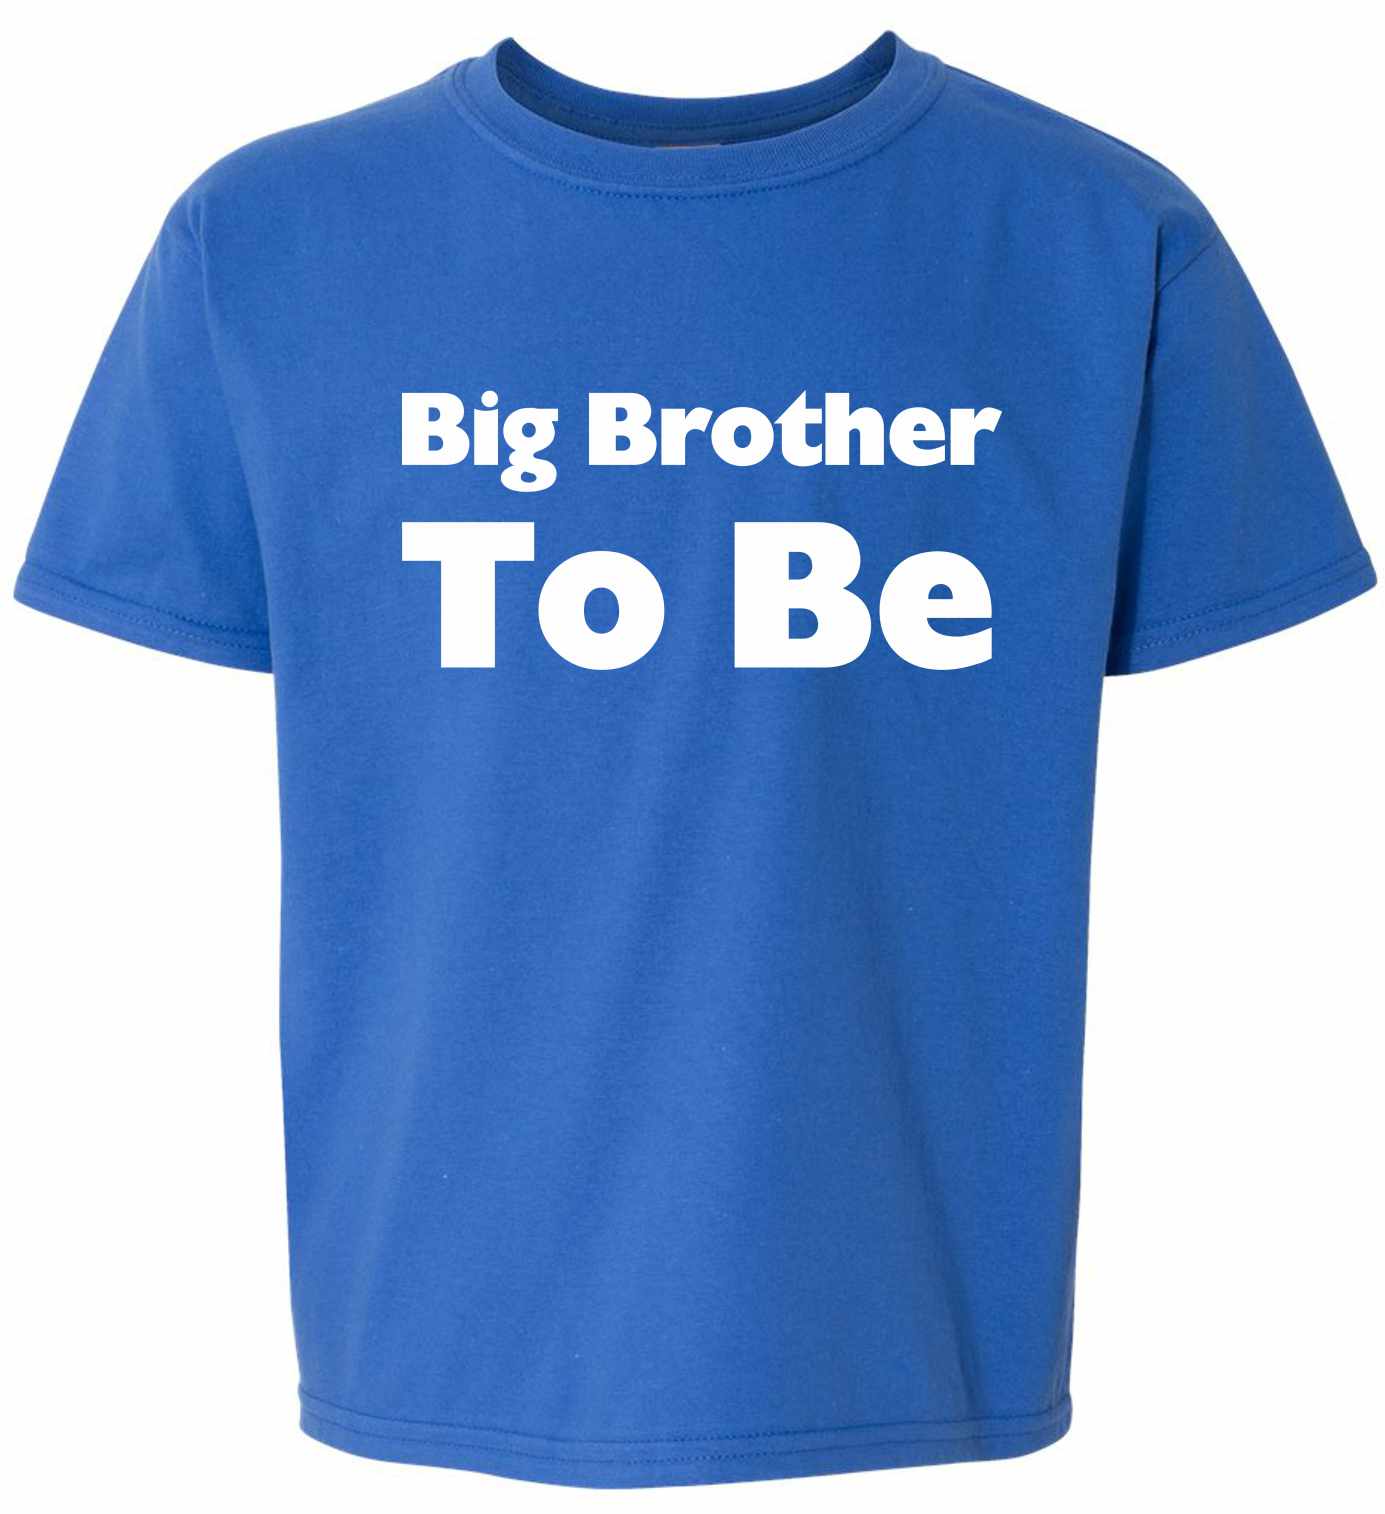 Big Brother To Be on Kids T-Shirt